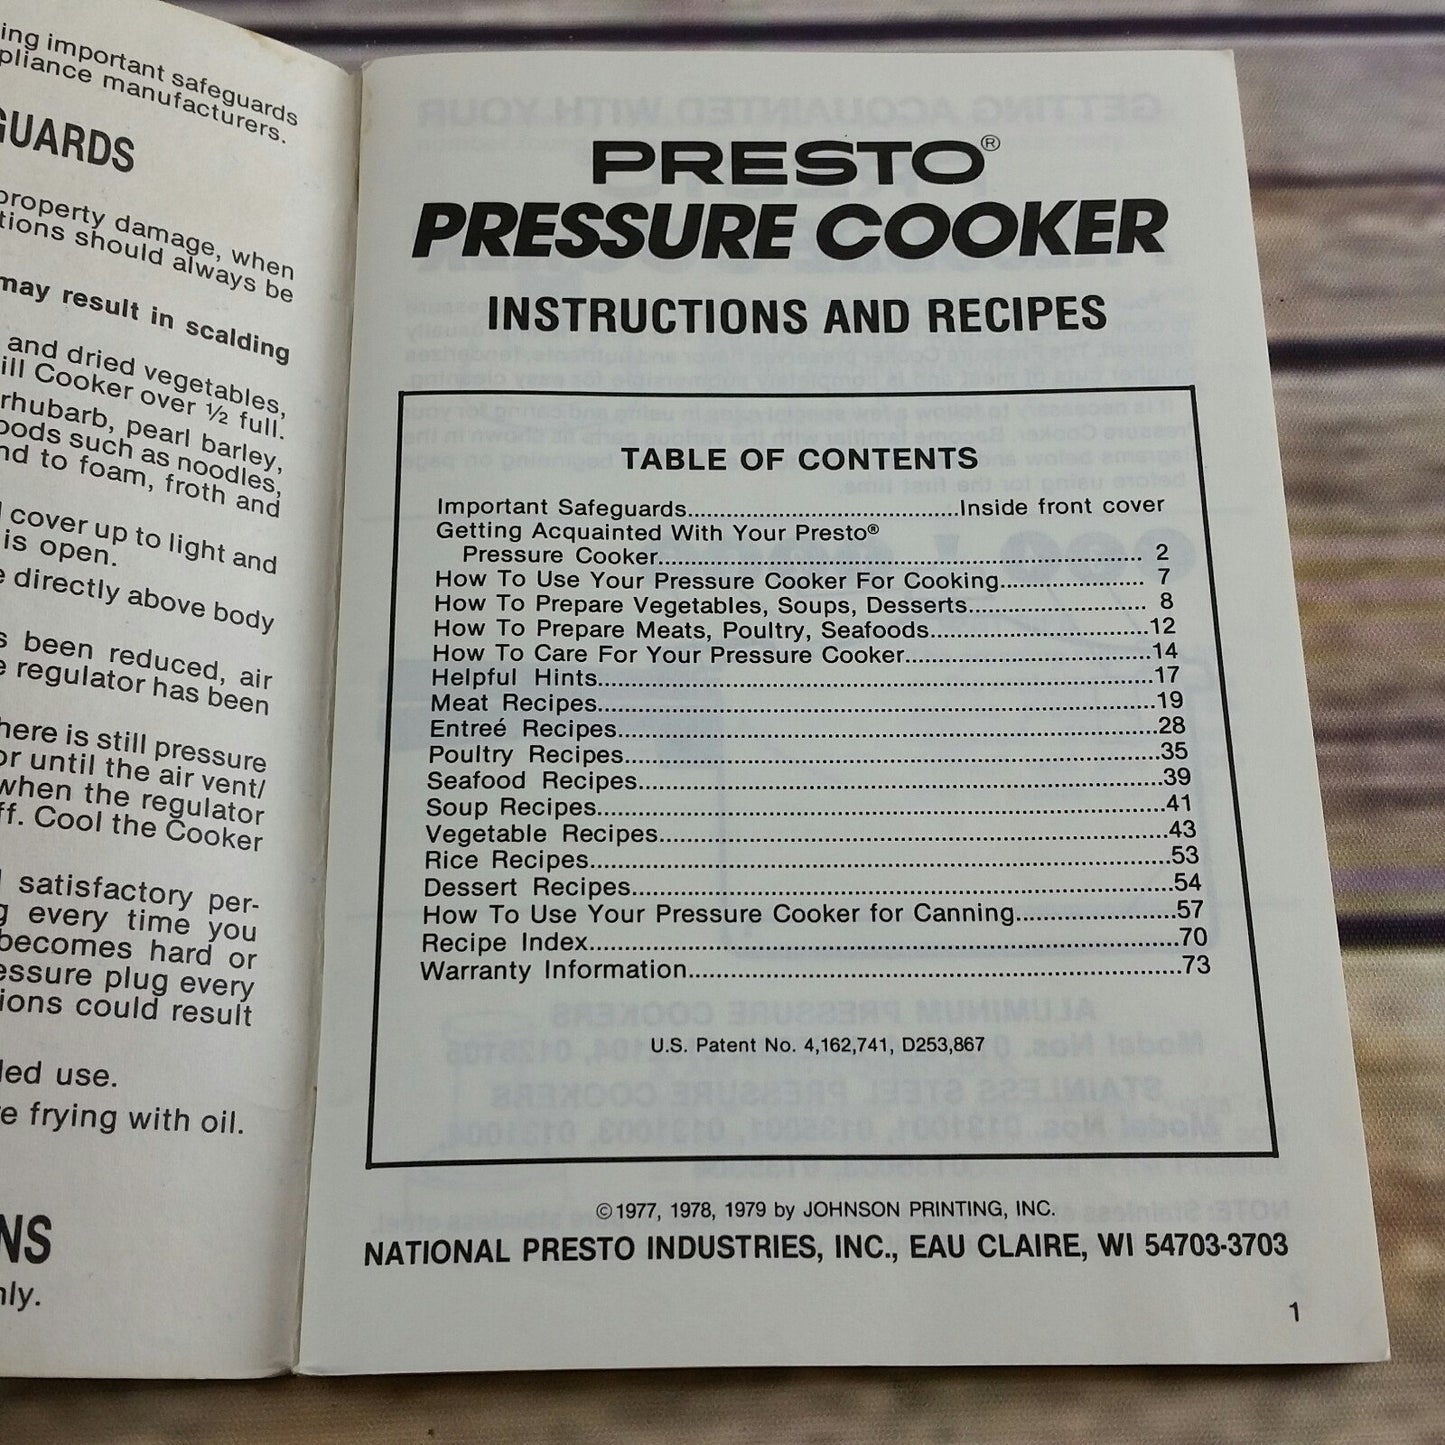 Vintage Cookbook Presto Pressure Cooker Recipes and Instructions 1970s Manual 1979 Canner Canning